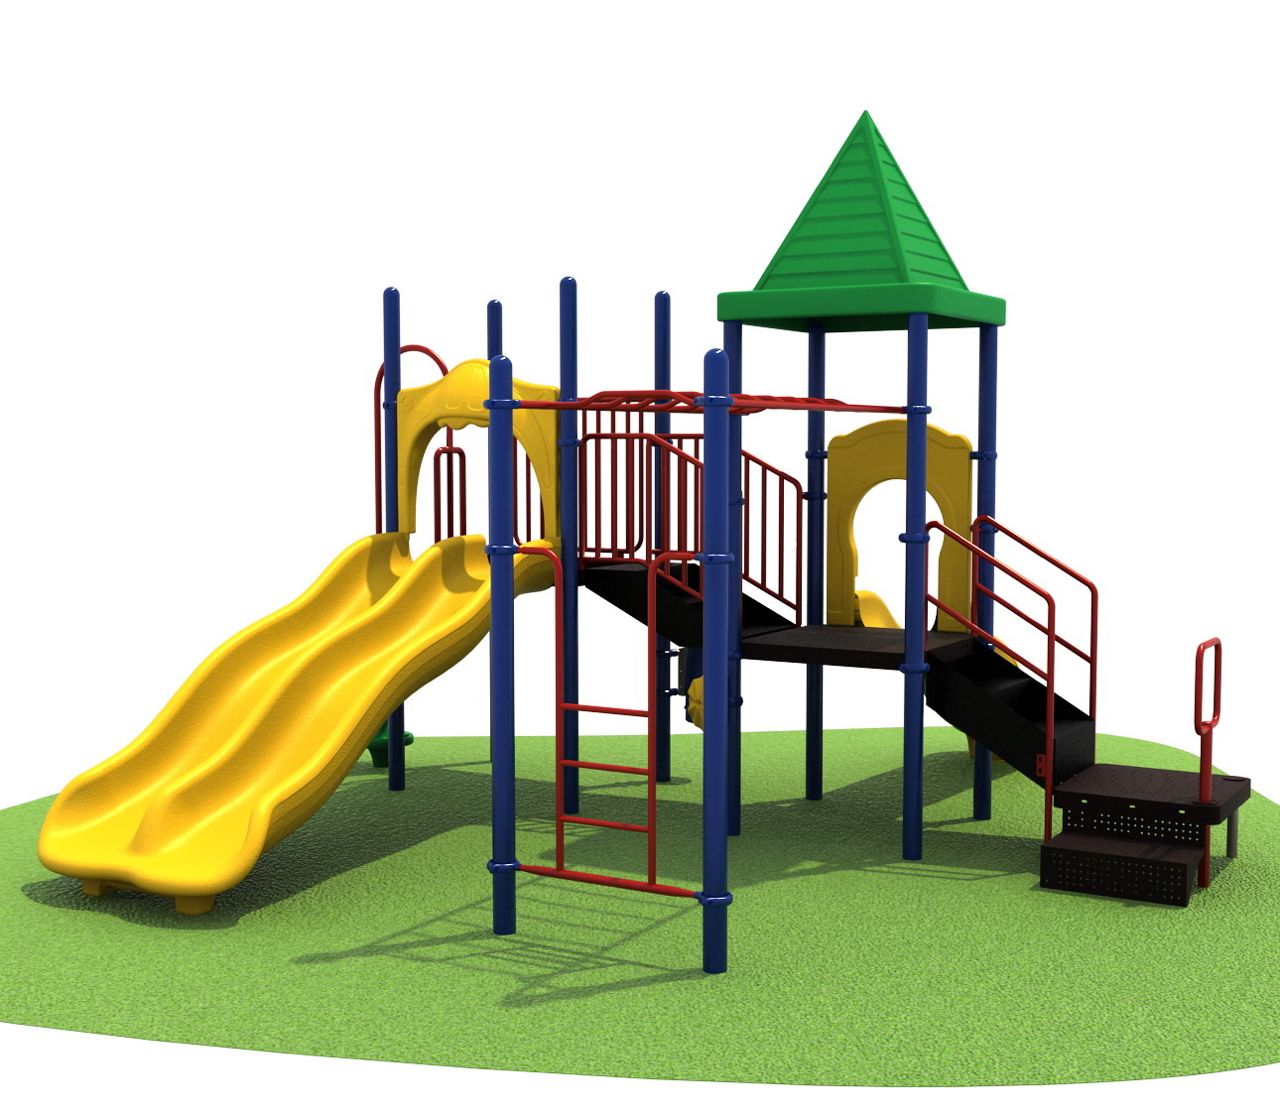 Home Playground Equipment   Clipart Panda   Free Clipart Images